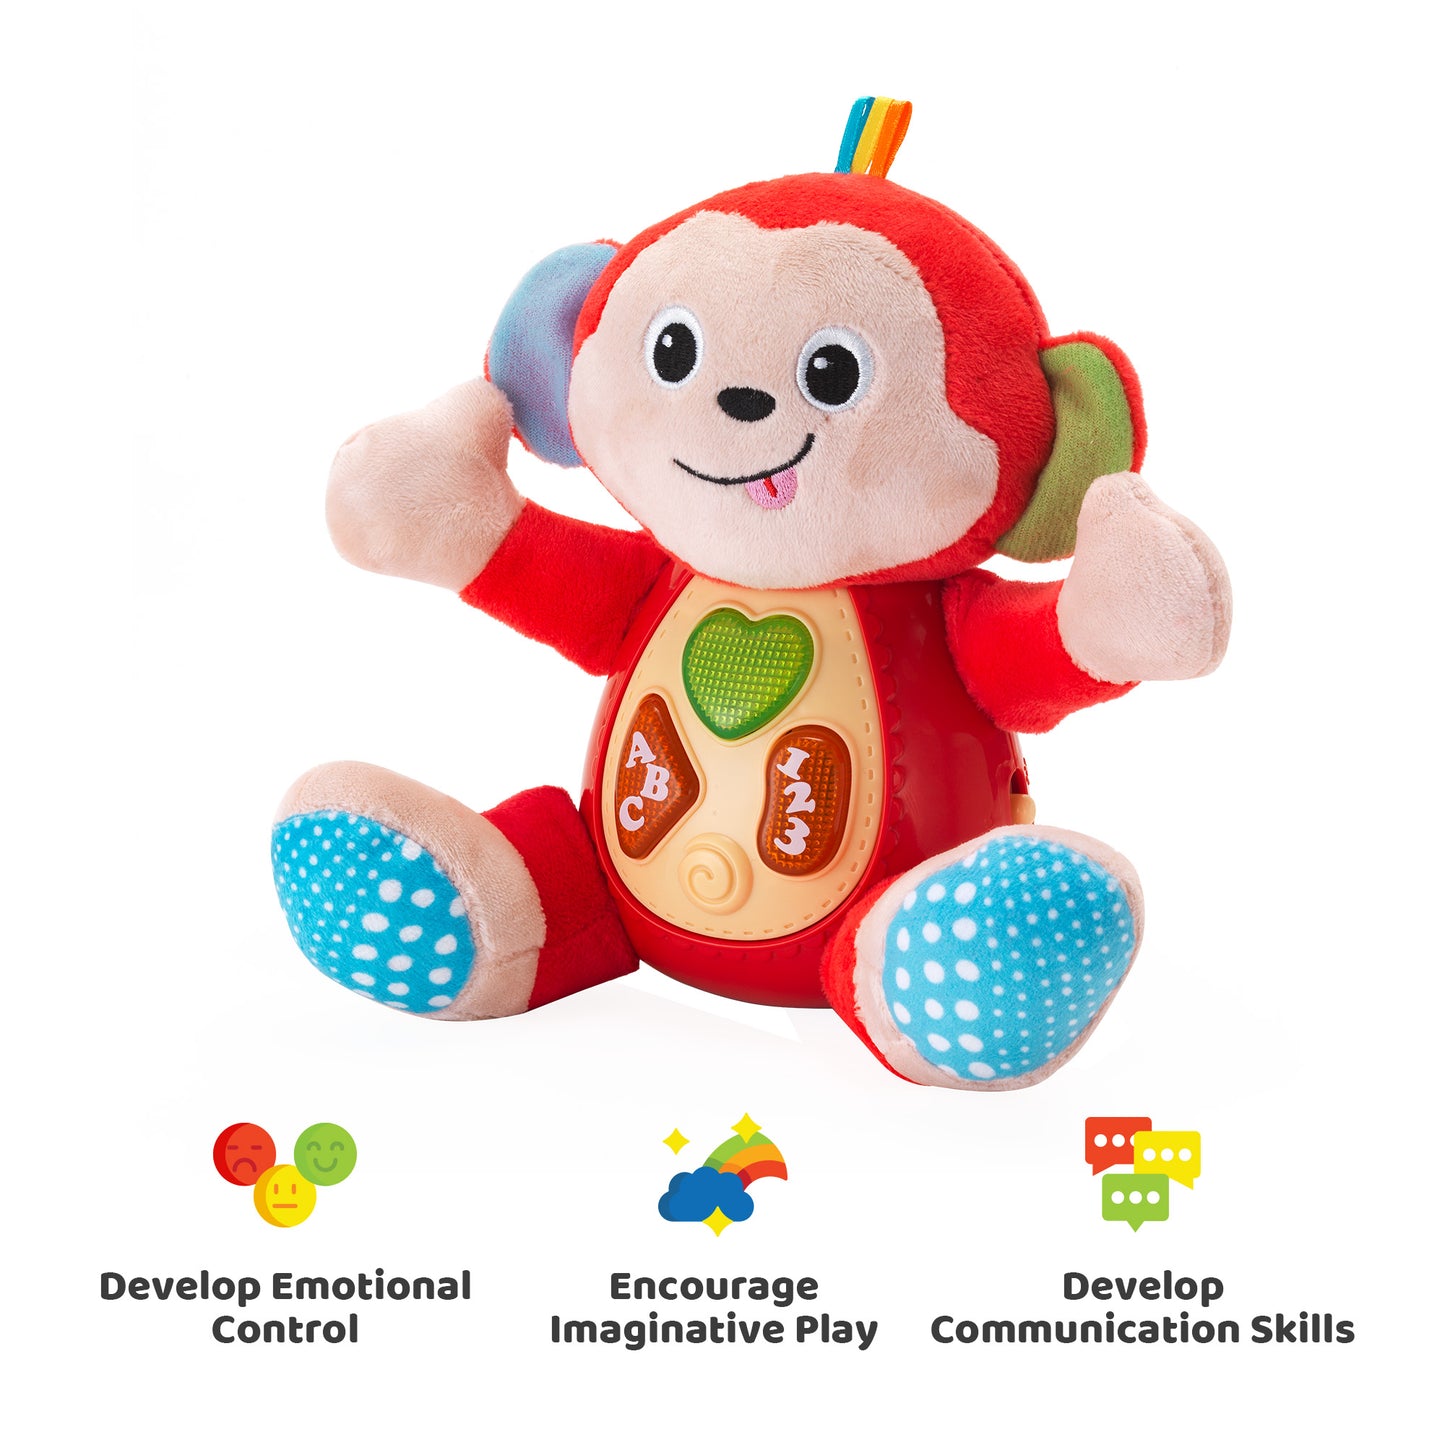 KiddoLab Musical Monkey Plush Toy - Soft Stuffed Animal with Light-Up Buttons and Melodic Nursery Songs for 3+ Month Old Babies